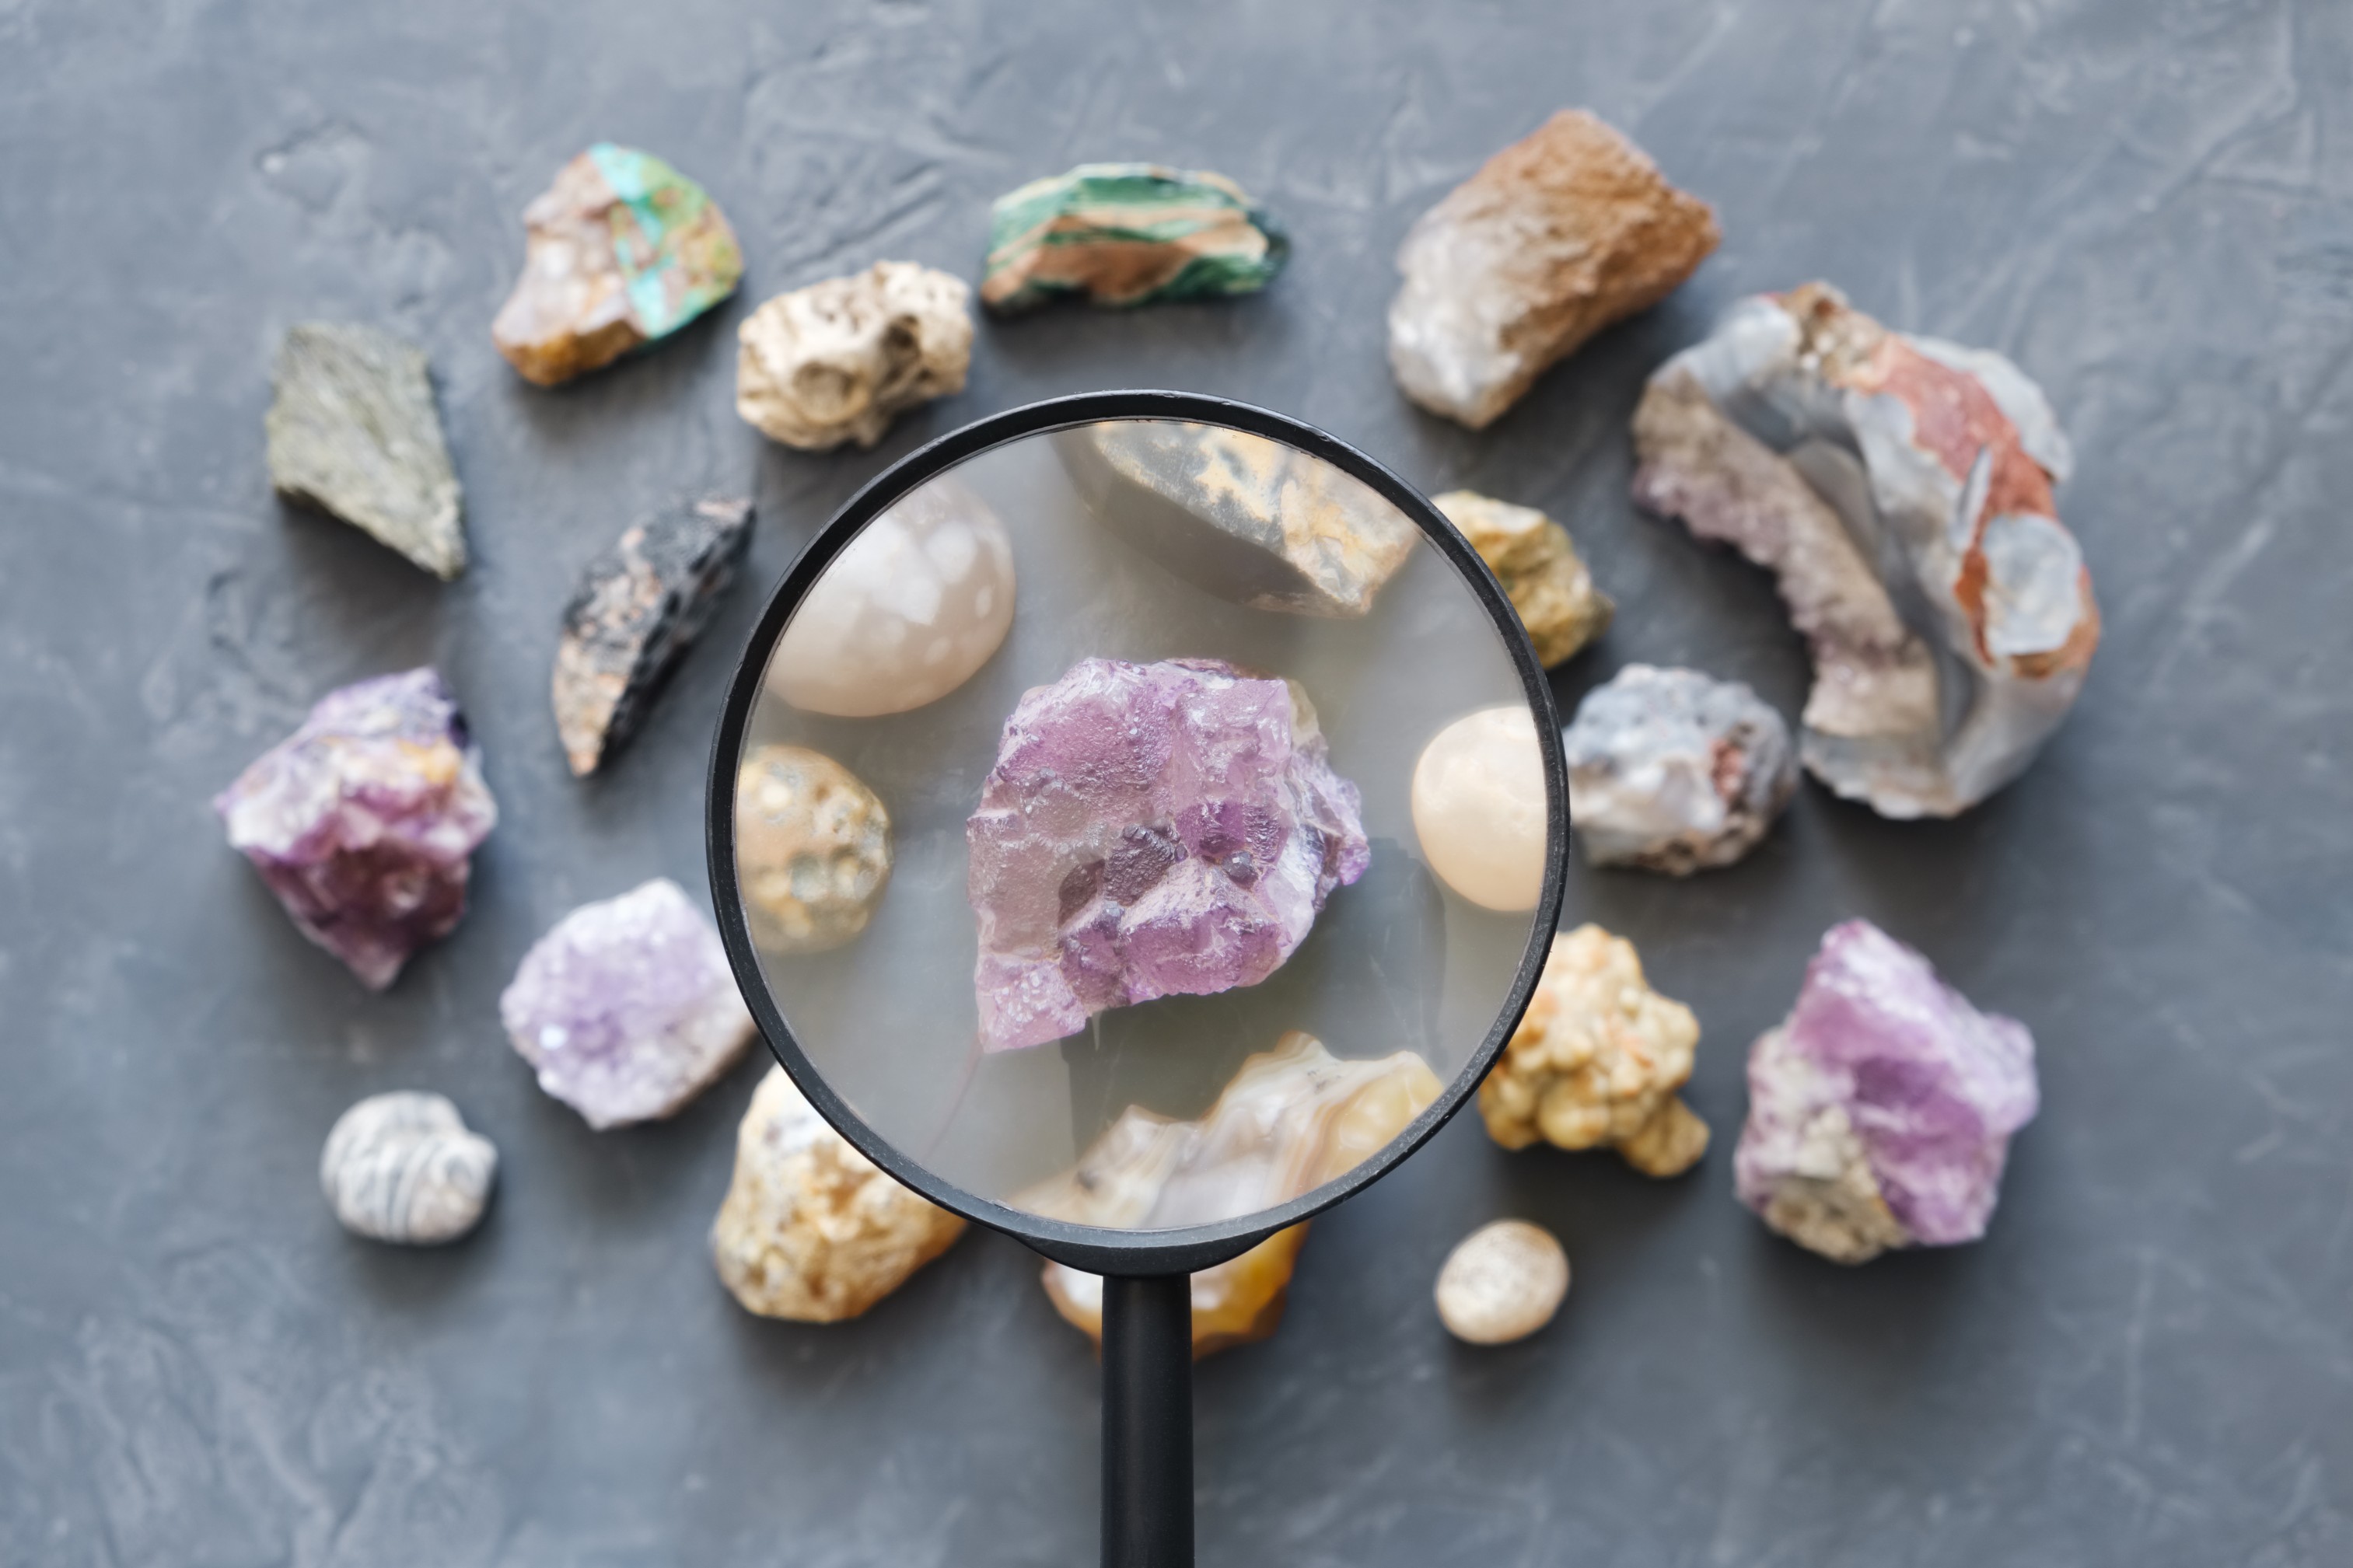 Rock under magnifying glass